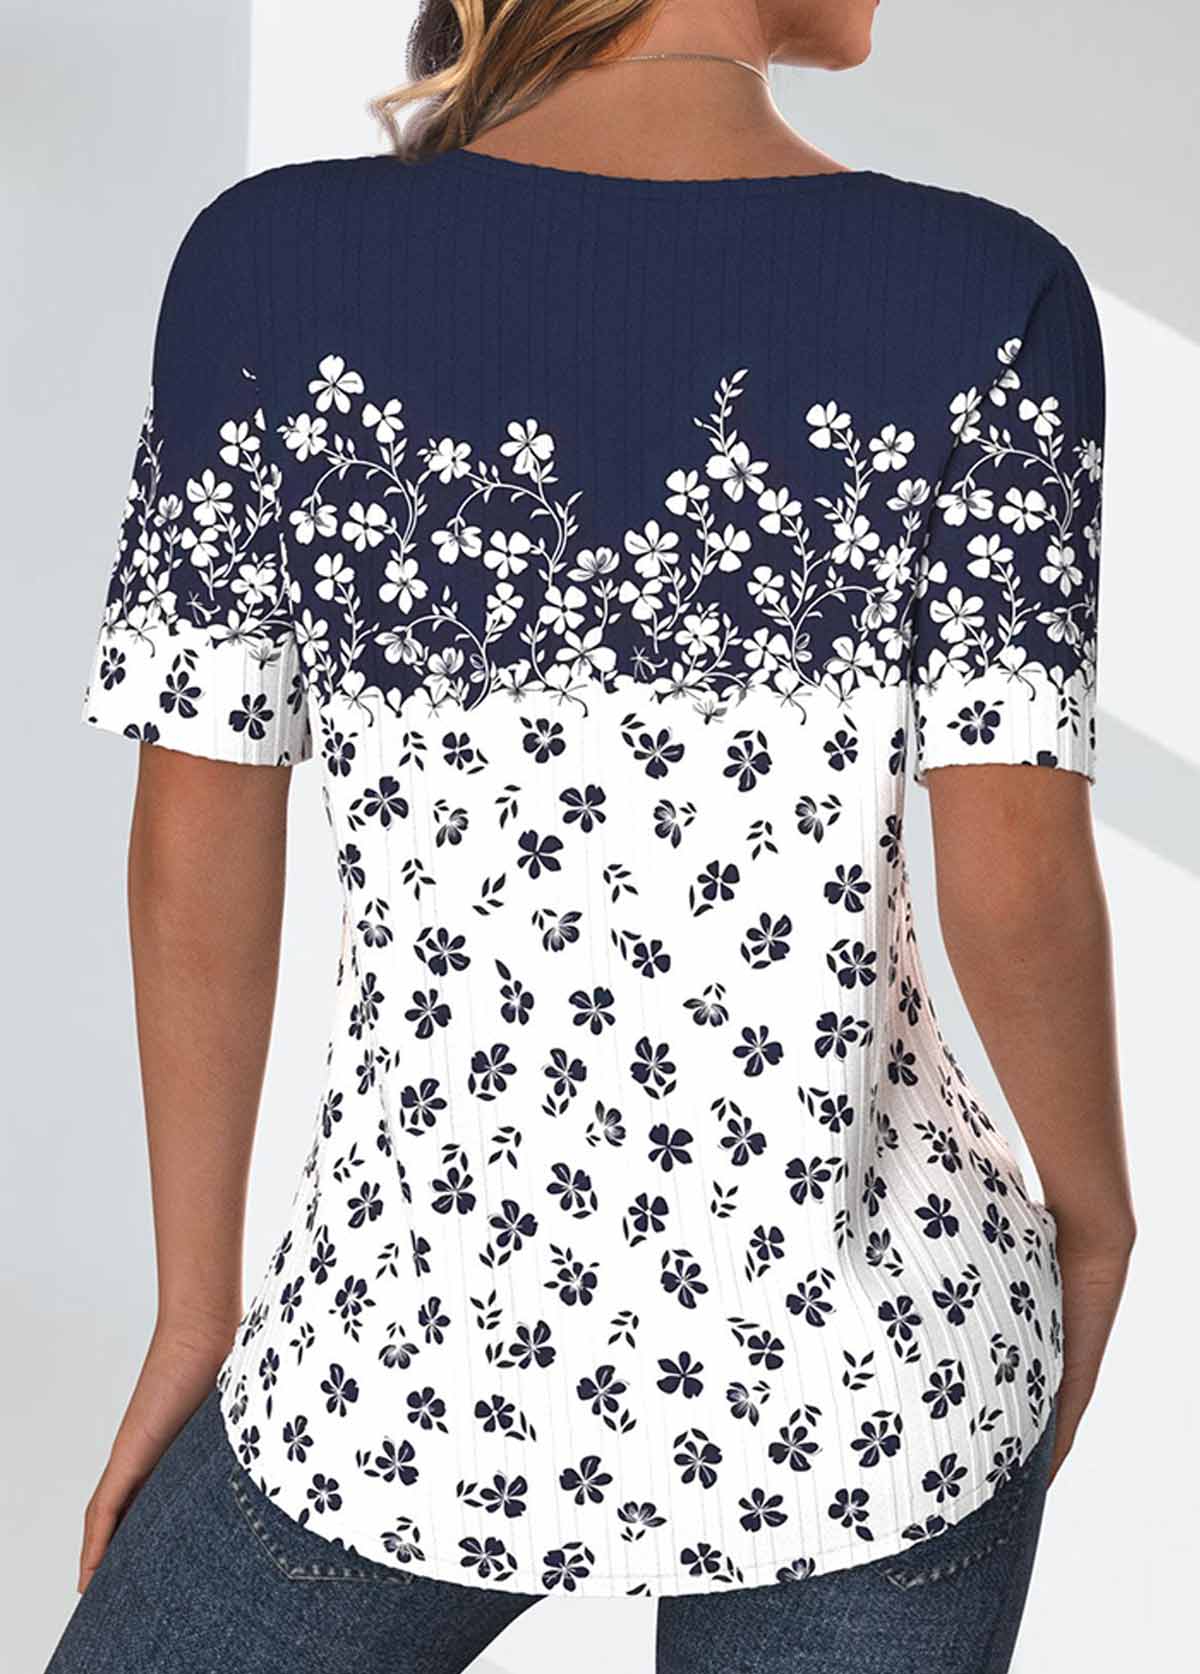 Ditsy Floral Print Textured Fabric Navy T Shirt